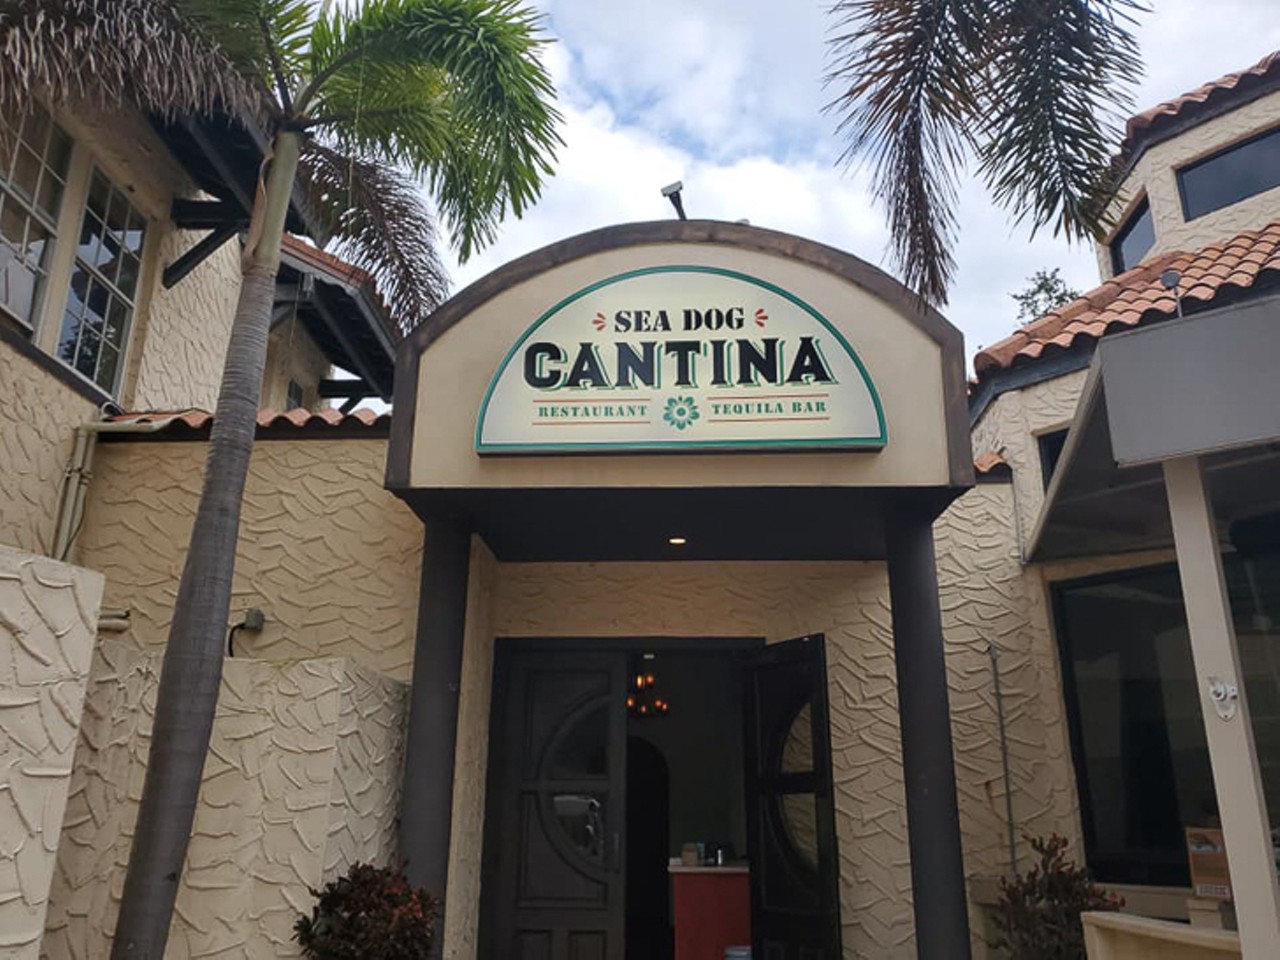 Sea Dog Cantina  
2832 Beach Blvd. S., Gulfport
The Mexican restaurant and tequila bar concept offers favorites like burritos, tacos, chimichangas, and chiles rellenos.
Photo via Sea Dog Cantina/Facebook